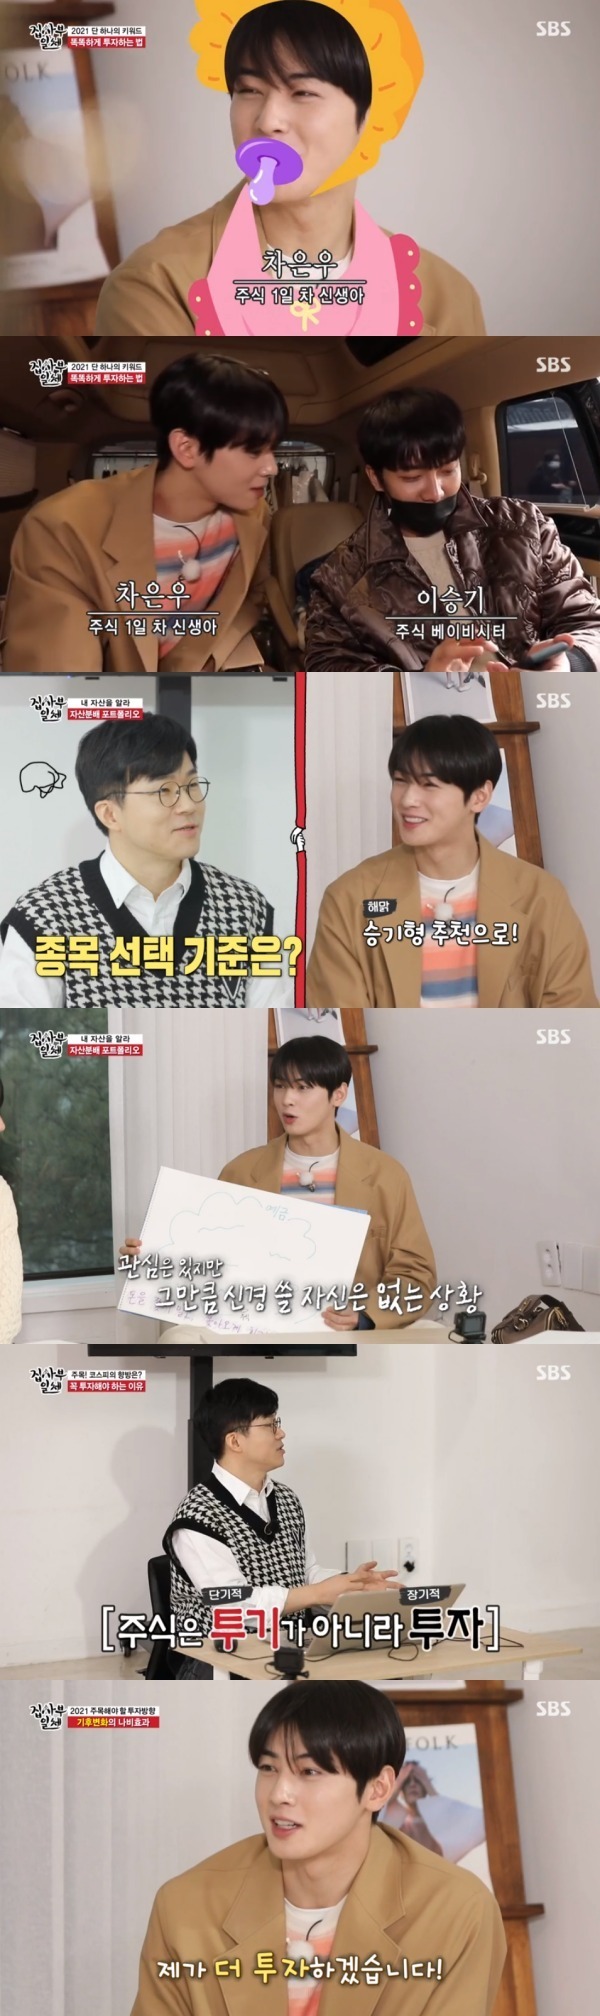 Seoul=) = Cha Eun-woo revealed that he had introductory to Share because of All The Butlers.In SBS All The Butlers broadcast on the 28th, the members studied how to become rich with economic content YouTuber Shuka.On this day, Yang Se-heeong revealed the idea that the keyword of 2021 was Share; Kim Dong-hyun praised Yang Se-heeong as a master of Share investment.Cha Eun-woo said that All The Butlers led to introductory to Share.Just before filming, he purchased a week of L electronics recommended by Lee Seung-gi; Shin Seong-rok was saddened by Lee Seung-gi, saying, Why dont you tell me?Before talking about Share in earnest, Shuka decided to learn about the asset allocation of the members.First, Kim Dong-hyun was mostly in the risky assets such as virtual currency, Share, and real estate.Its a general look of a large number of people, Shuka explained, and its a fairly aggressive investment.Yang Se-hyeong and Lee Seung-gi had more diverse portfolios than Kim Dong-hyun and Shin Sung-rok.In particular, Shuka saw Lee Seung-gis asset allocation table and said Shuka is a typical portfolio of rich people.The last published asset allocation table for the youngest Cha Eun-woo was purity itself: all deposits, with Share written in a very real size: one L electronic week.Cha Eun-woo asked if she should just save her money she earned because she couldnt afford to care about Share.It was a question that would have been asked by those who did not do Share in the Share craze or by early-life socialites, and Shuka explained why investment was needed to meet Cha Eun-woos eye level.Shuka then explained the recent keywords in three ways, saying that he should pay attention to social changes and invest in Share accordingly.Cha Eun-woo focused when the story about L electron he bought came out.Climate change has made electric cars essential, and L Electronics has also entered the electric car parts business instead of mobile business.Cha Eun-woo laughed, saying, I will invest more in L electronics.